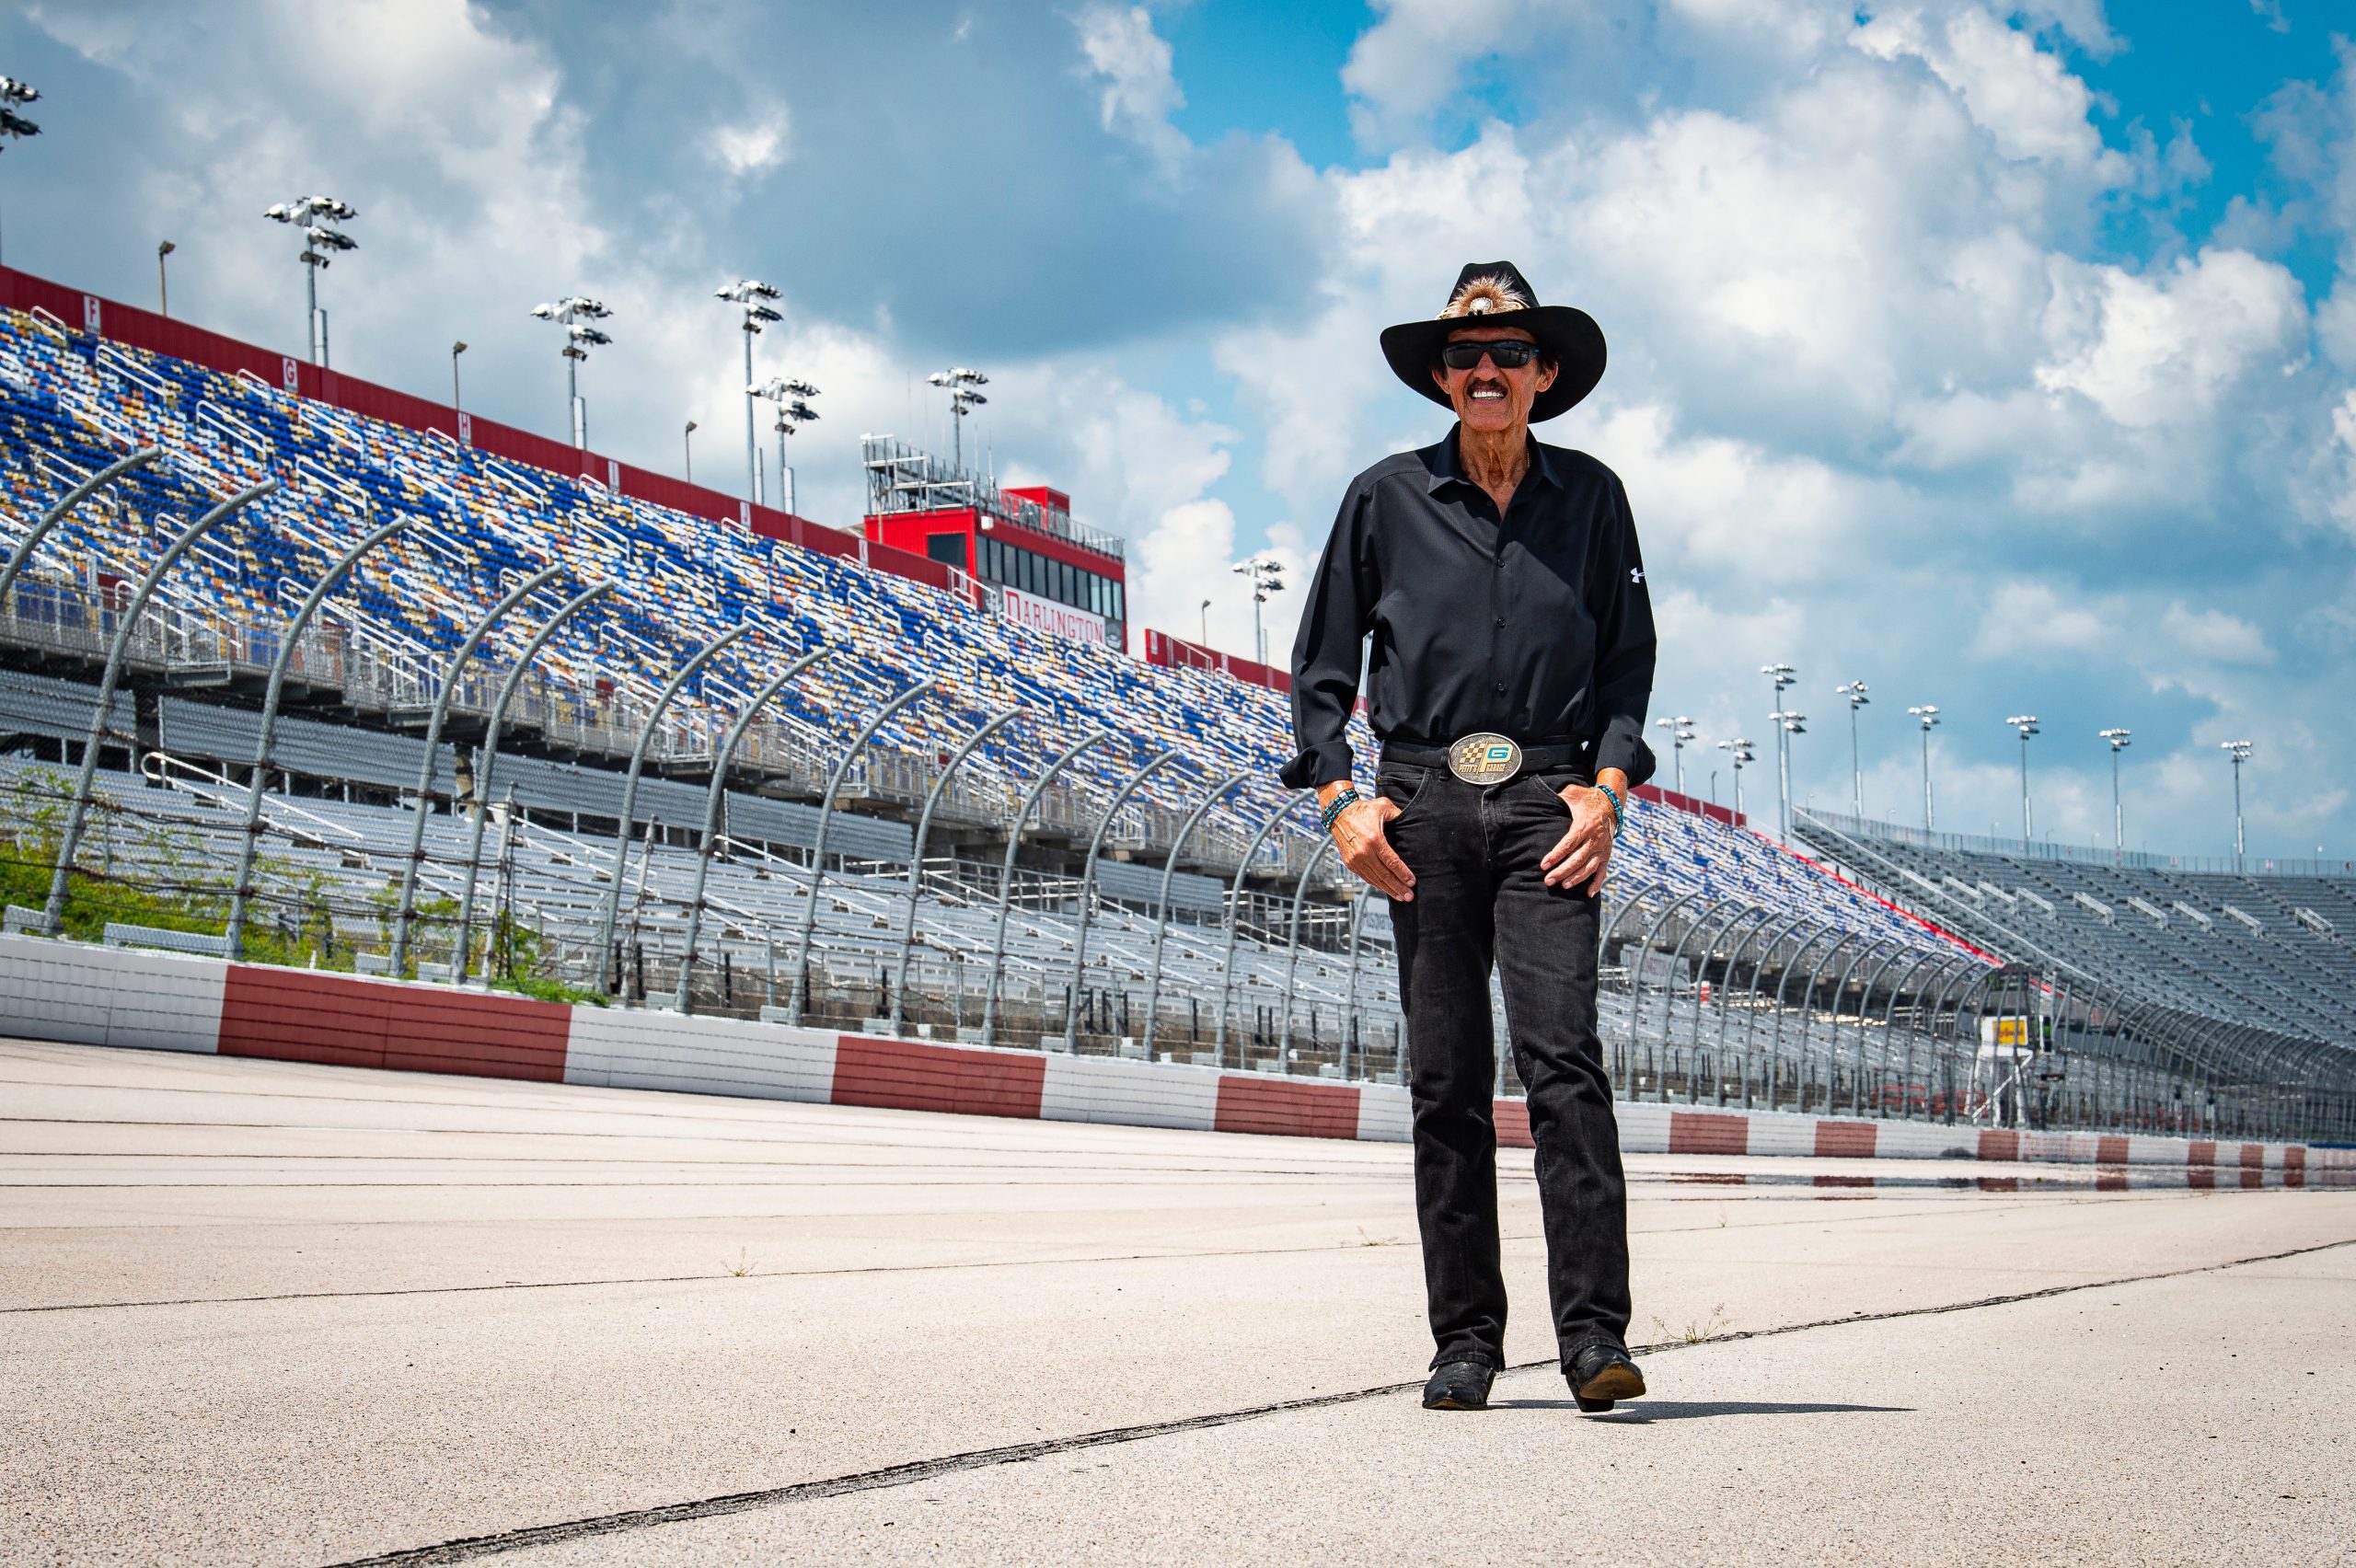 Richard Petty, “The King,” led 2,391 of the 17,120 laps he turned on the famed 1.366-mile egg-shaped oval during his illustrious career at Darlington Raceway. 
NASCAR Hall of Fame/Getty Images